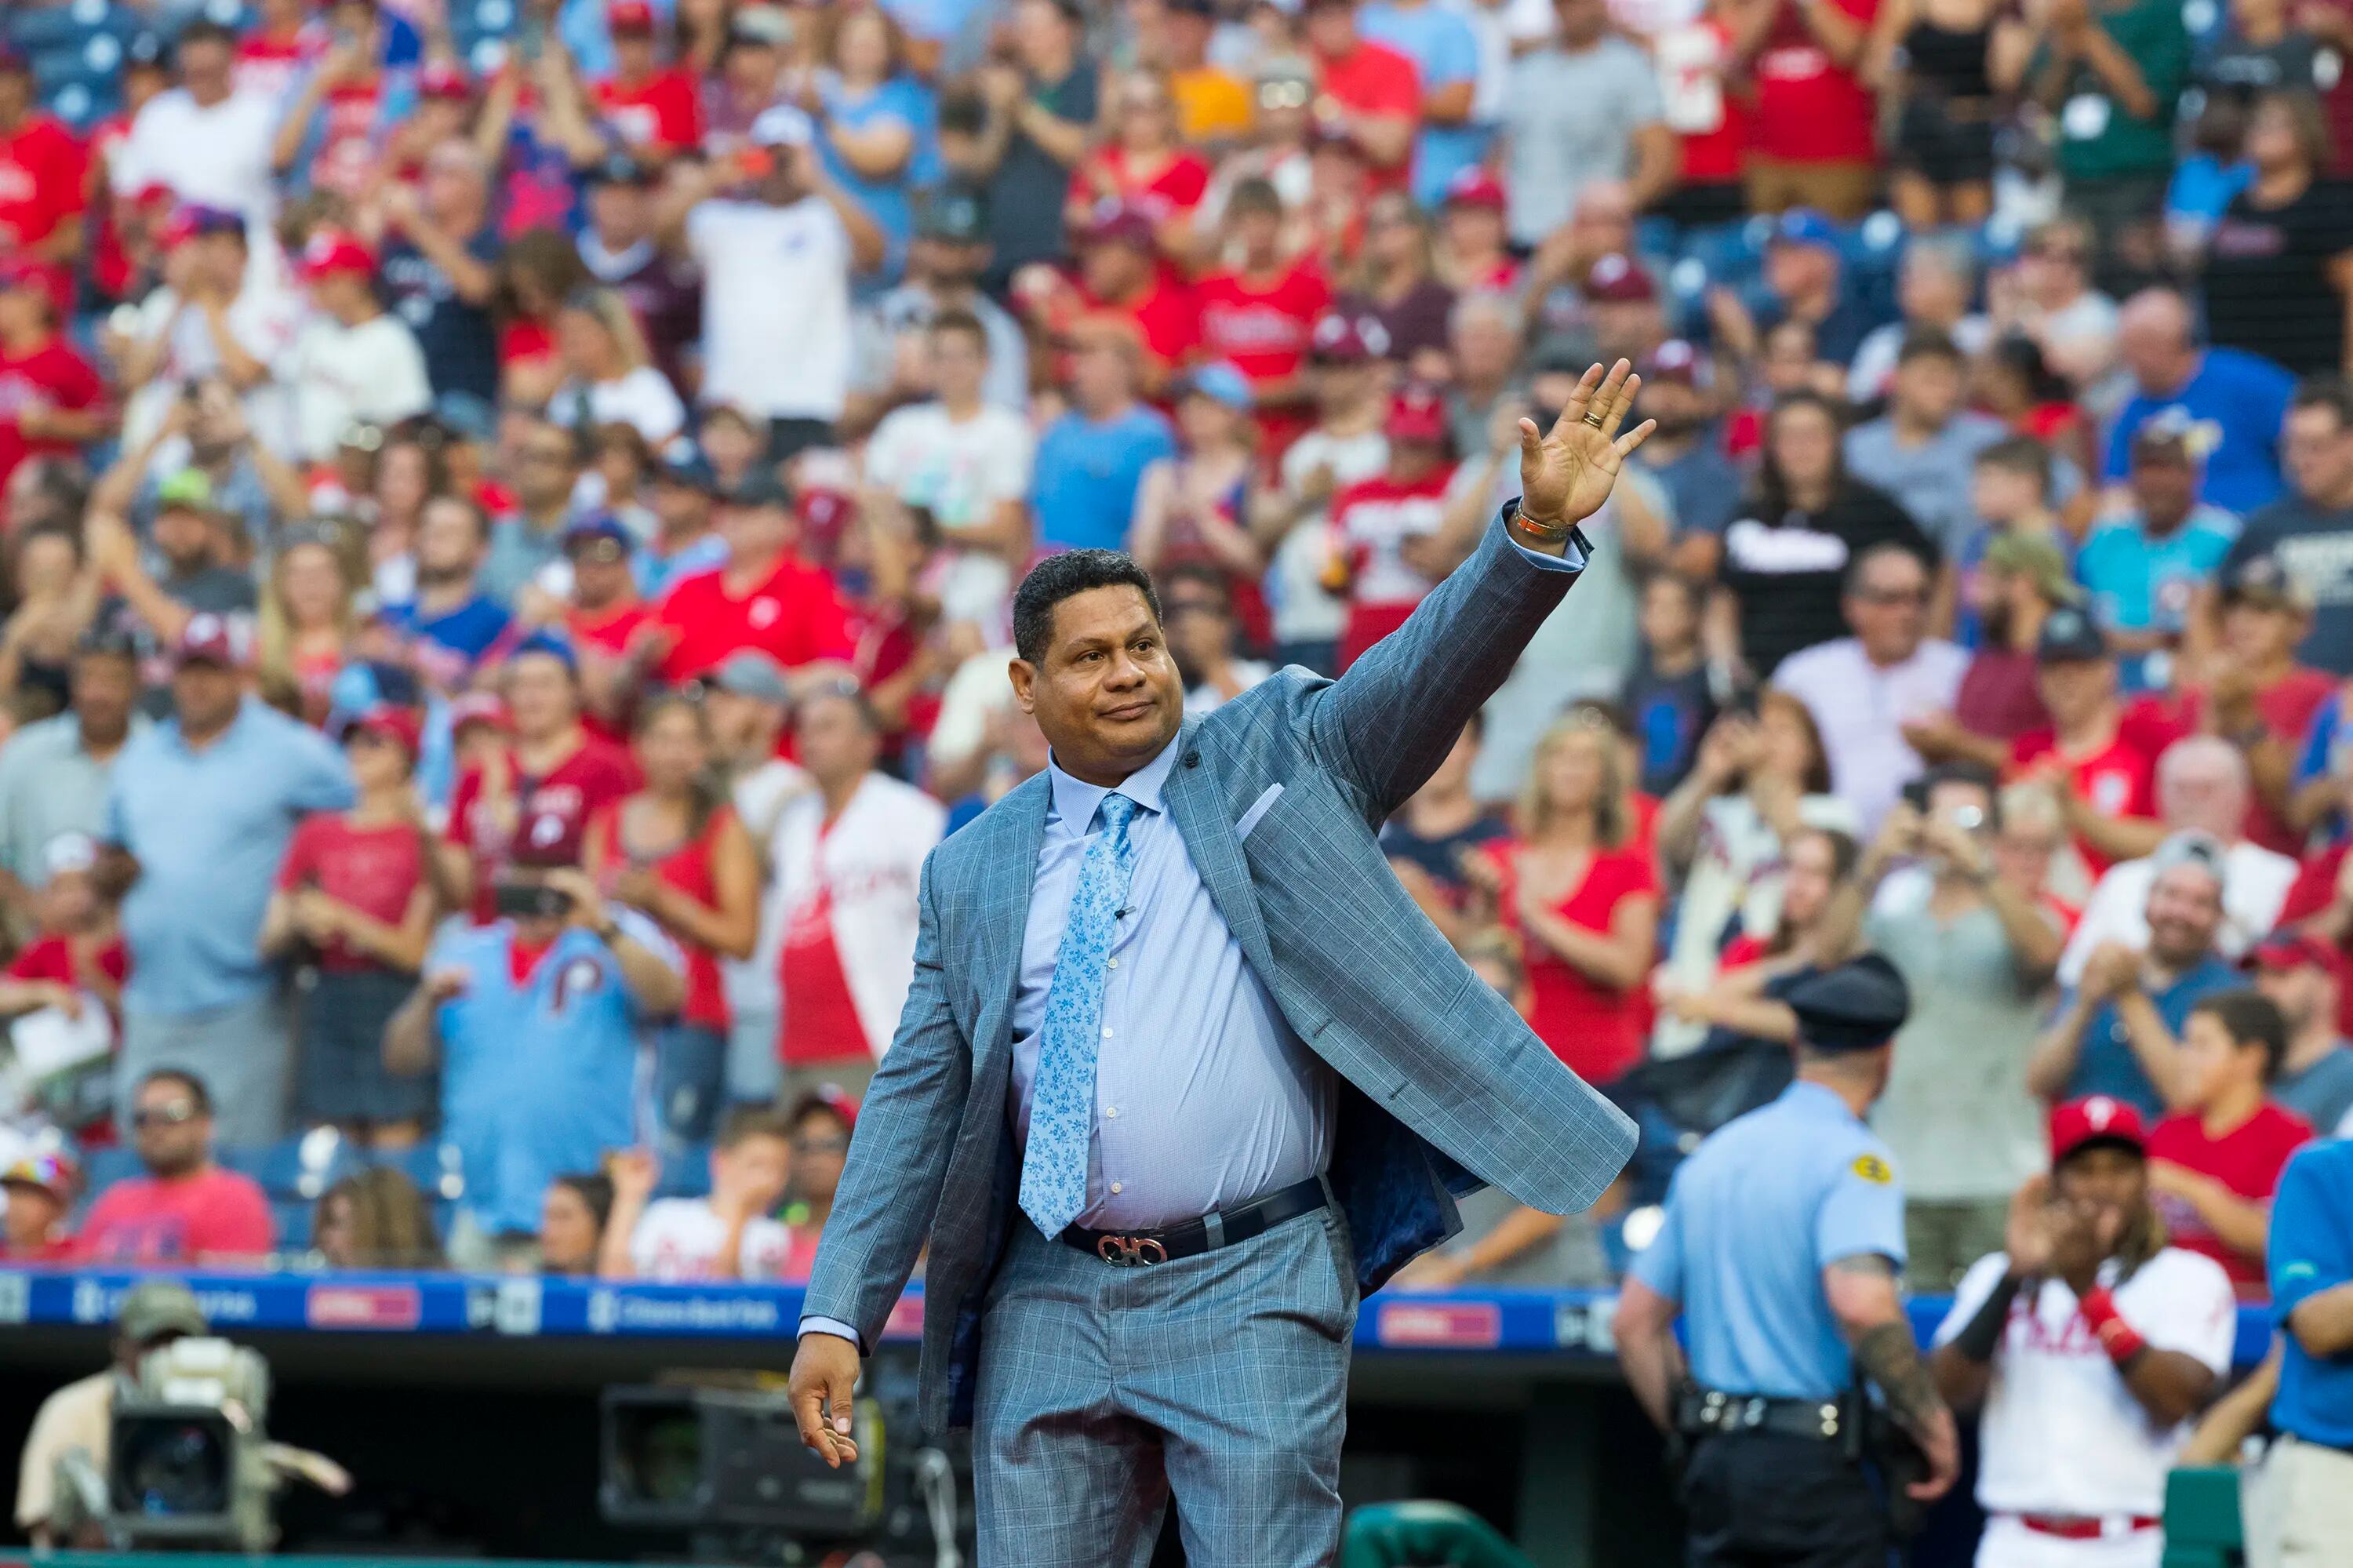 Bobby Abreu joins franchise immortals on the Phillies Wall of Fame   Phillies Nation - Your source for Philadelphia Phillies news, opinion,  history, rumors, events, and other fun stuff.